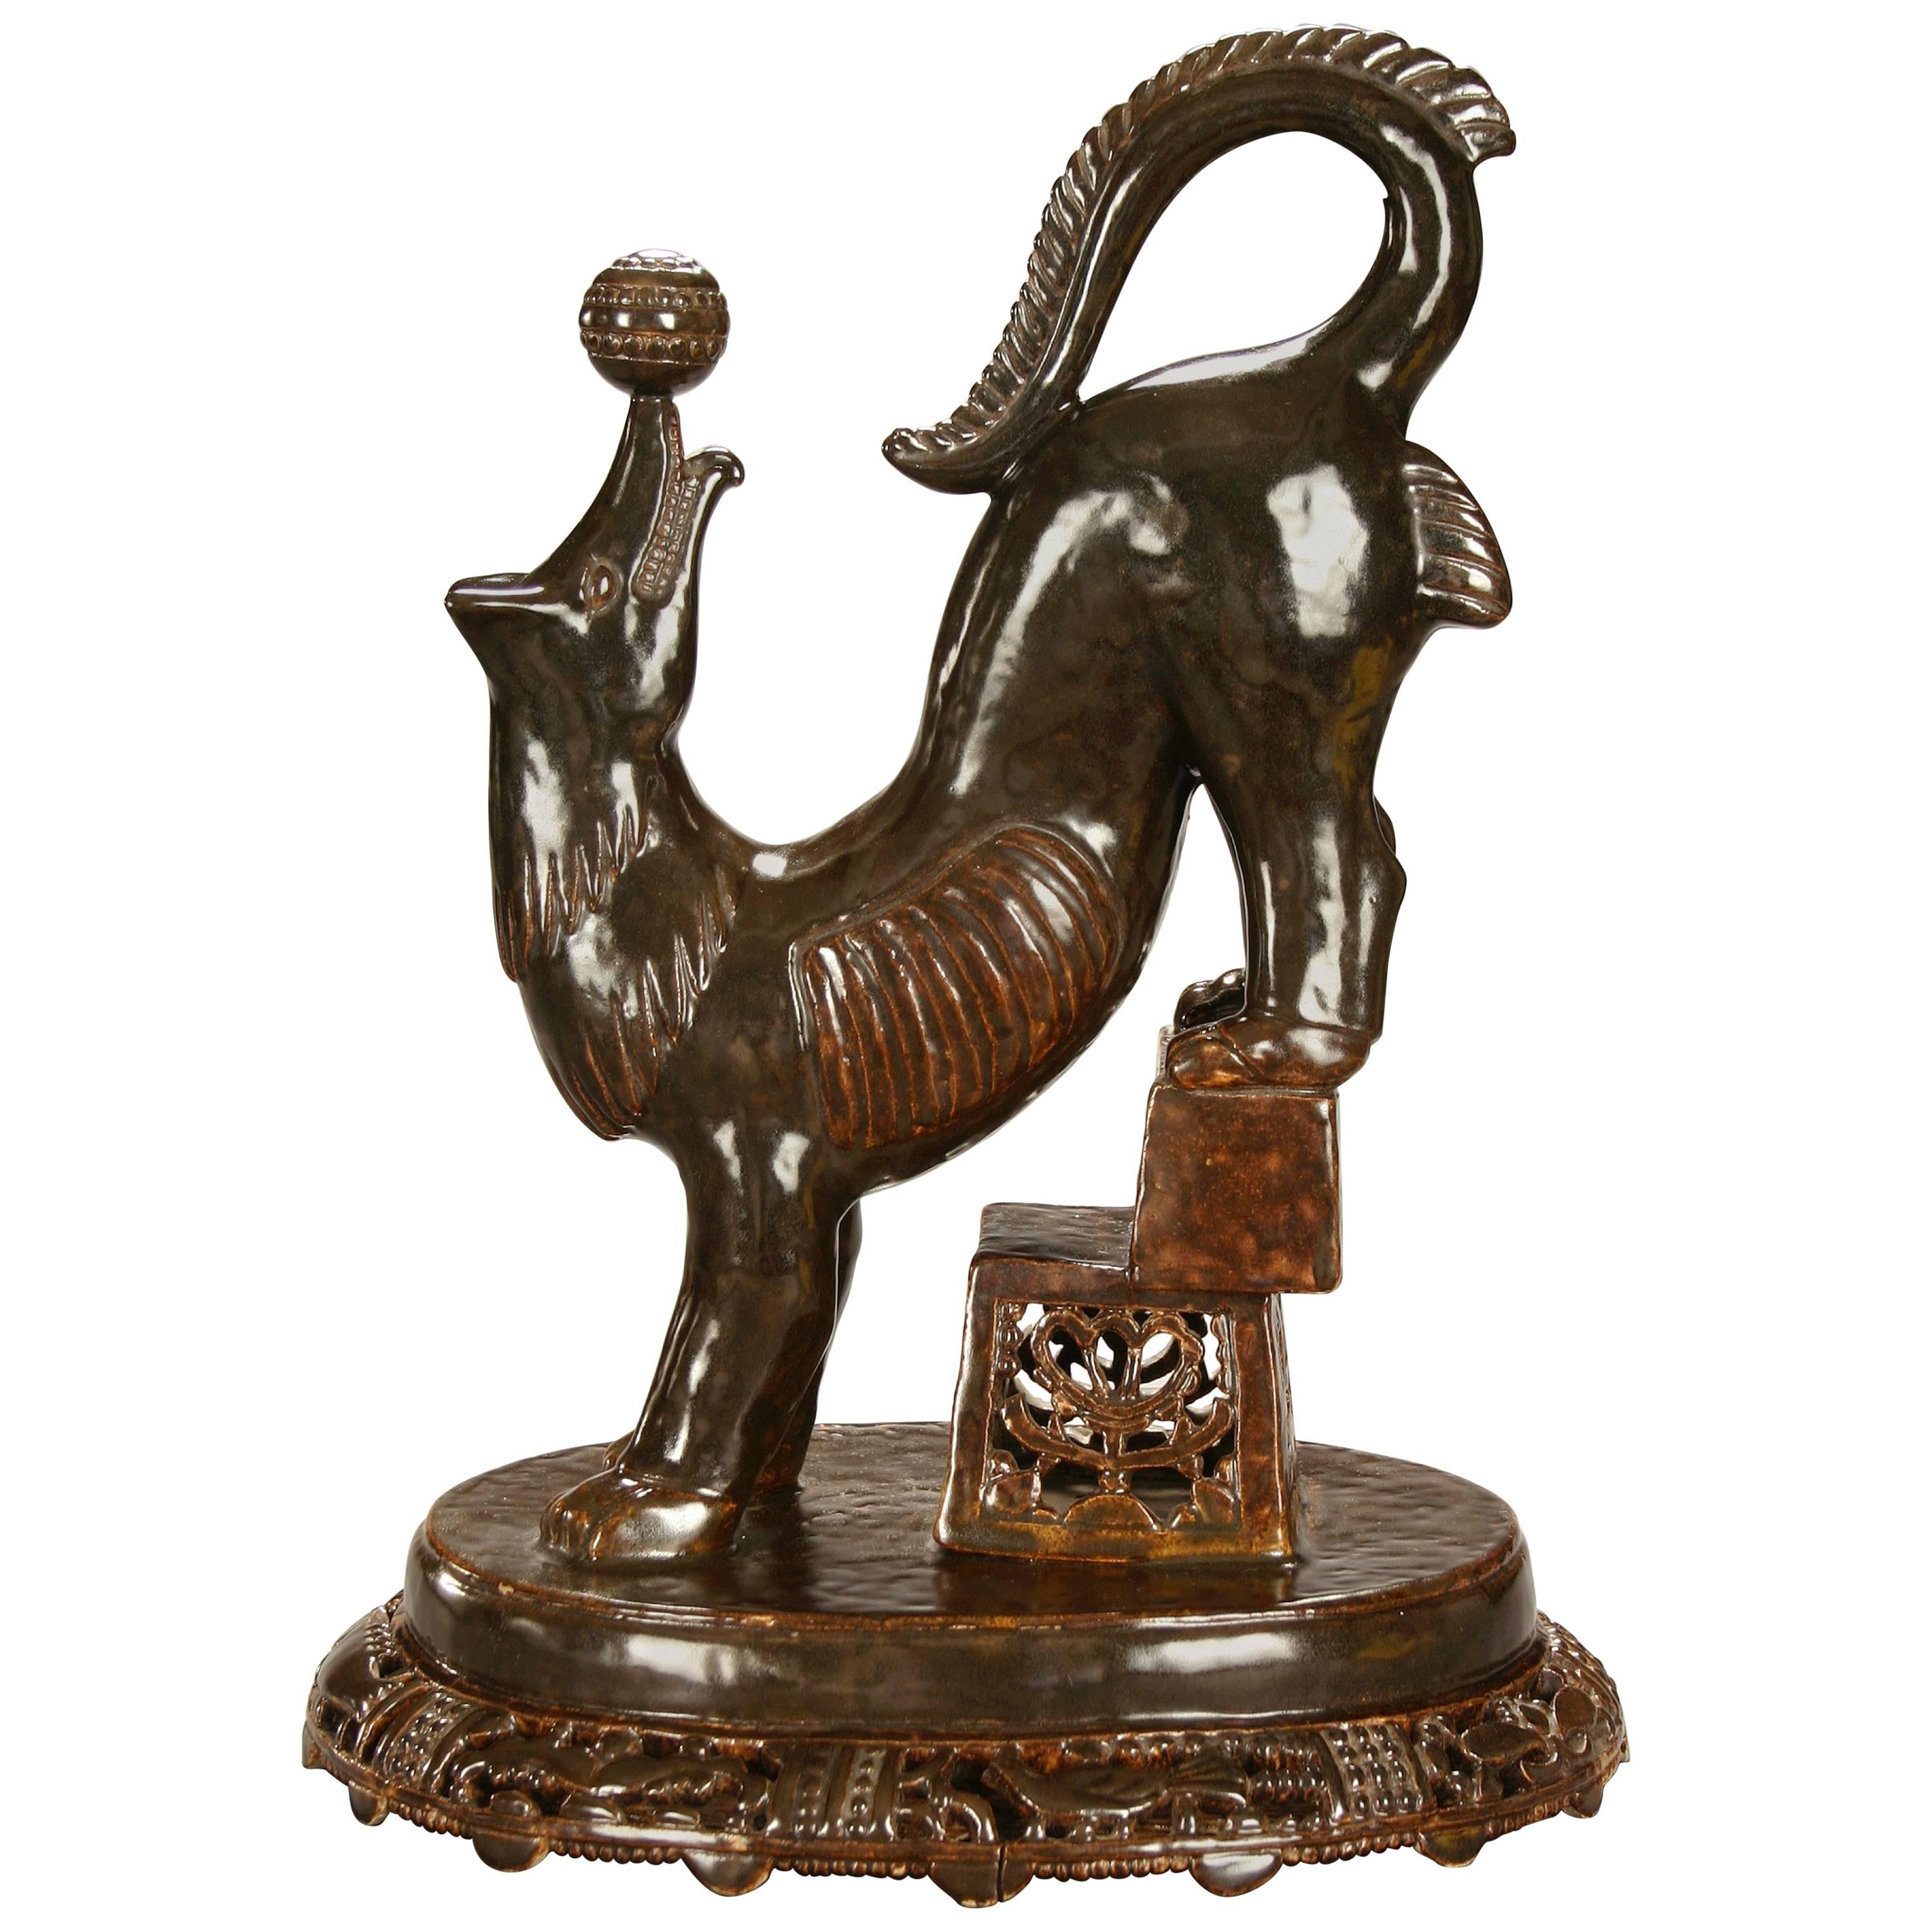 Seraphin Soudbinine, Rare French Art Deco Ceramic Sculpture of a Performing Dog For Sale